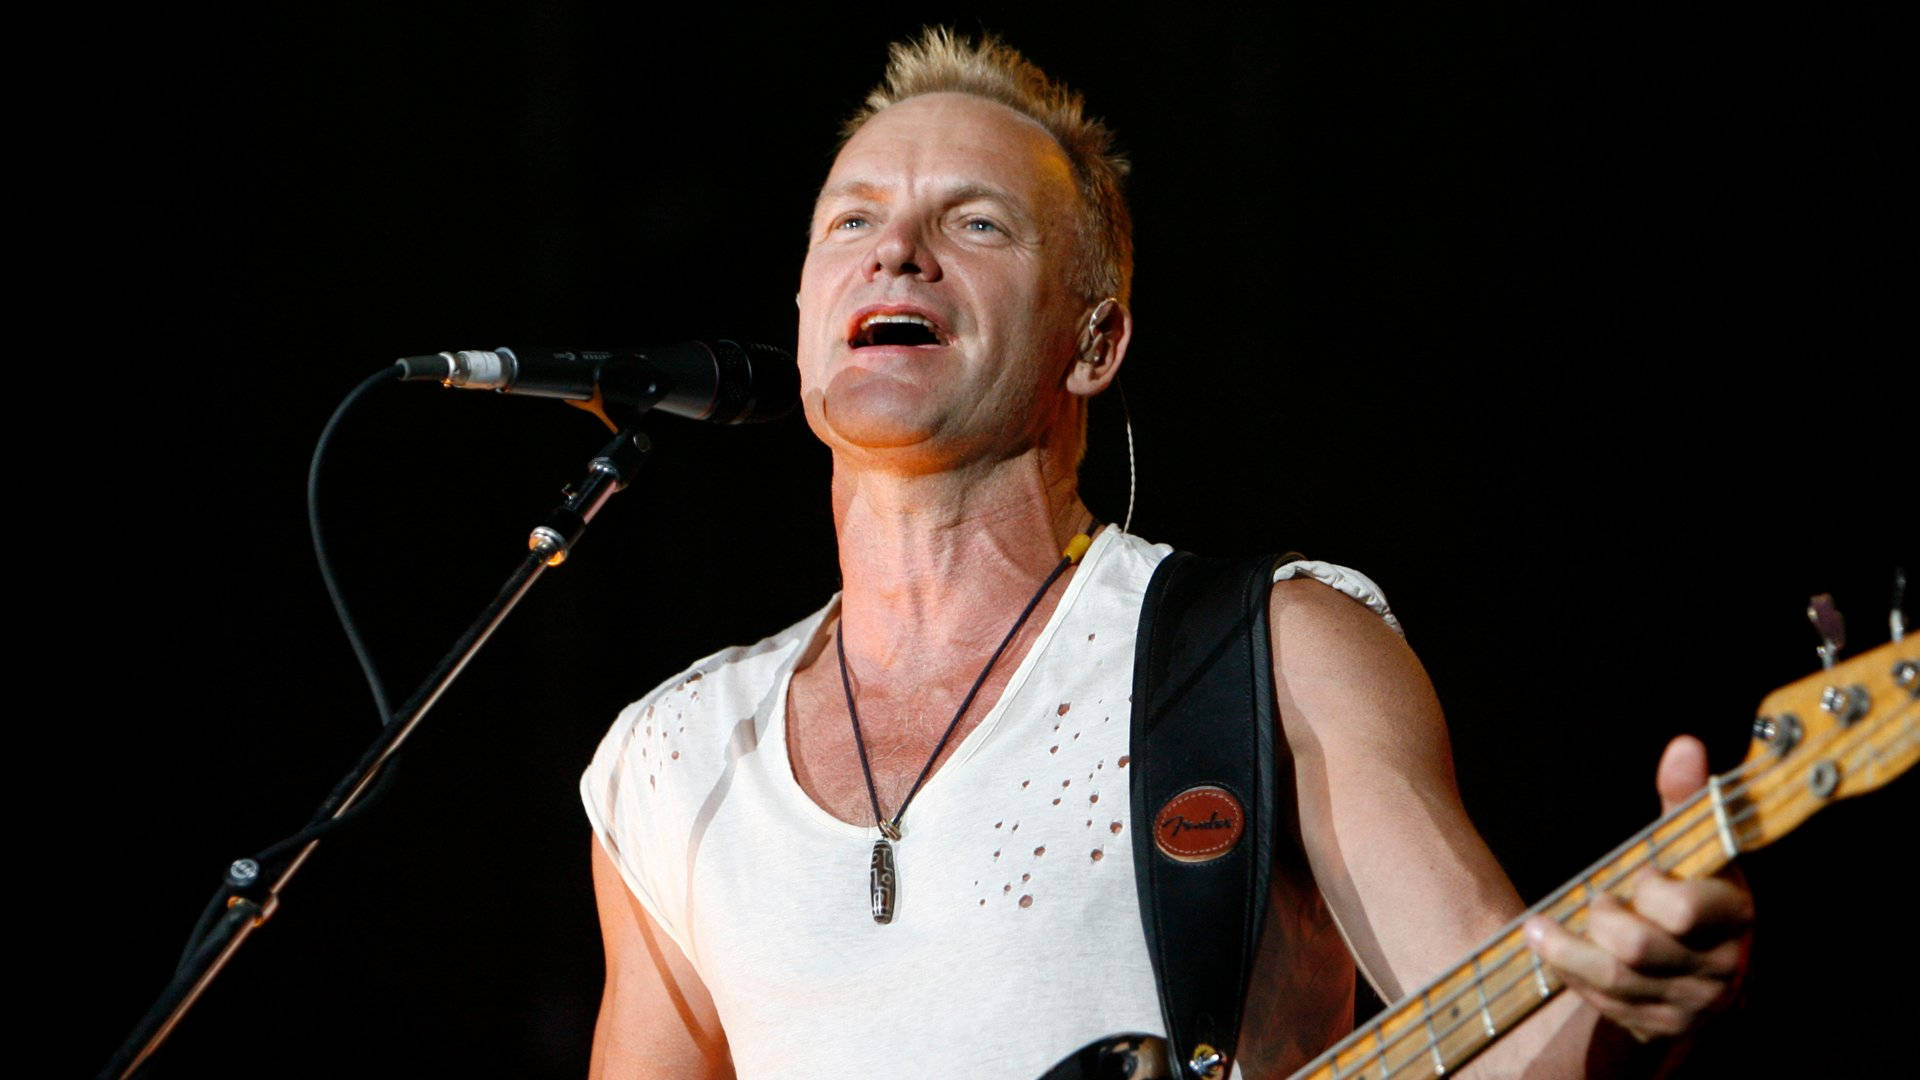 Iconic Musician - Sting in Concert Wallpaper